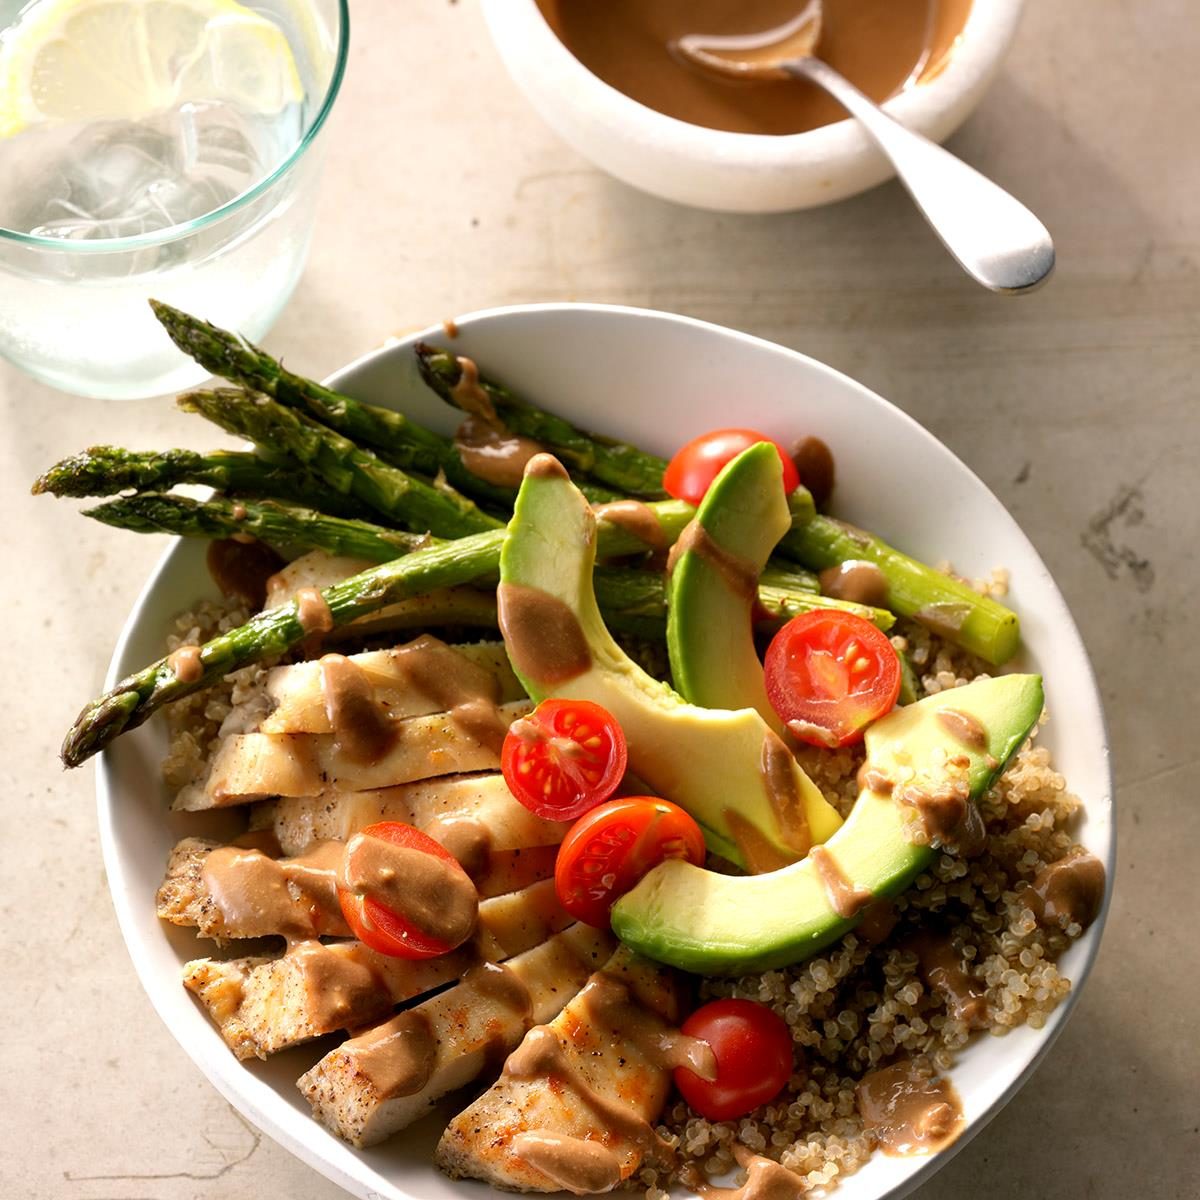 Day 27: Chicken Quinoa Bowls with Balsamic Dressing